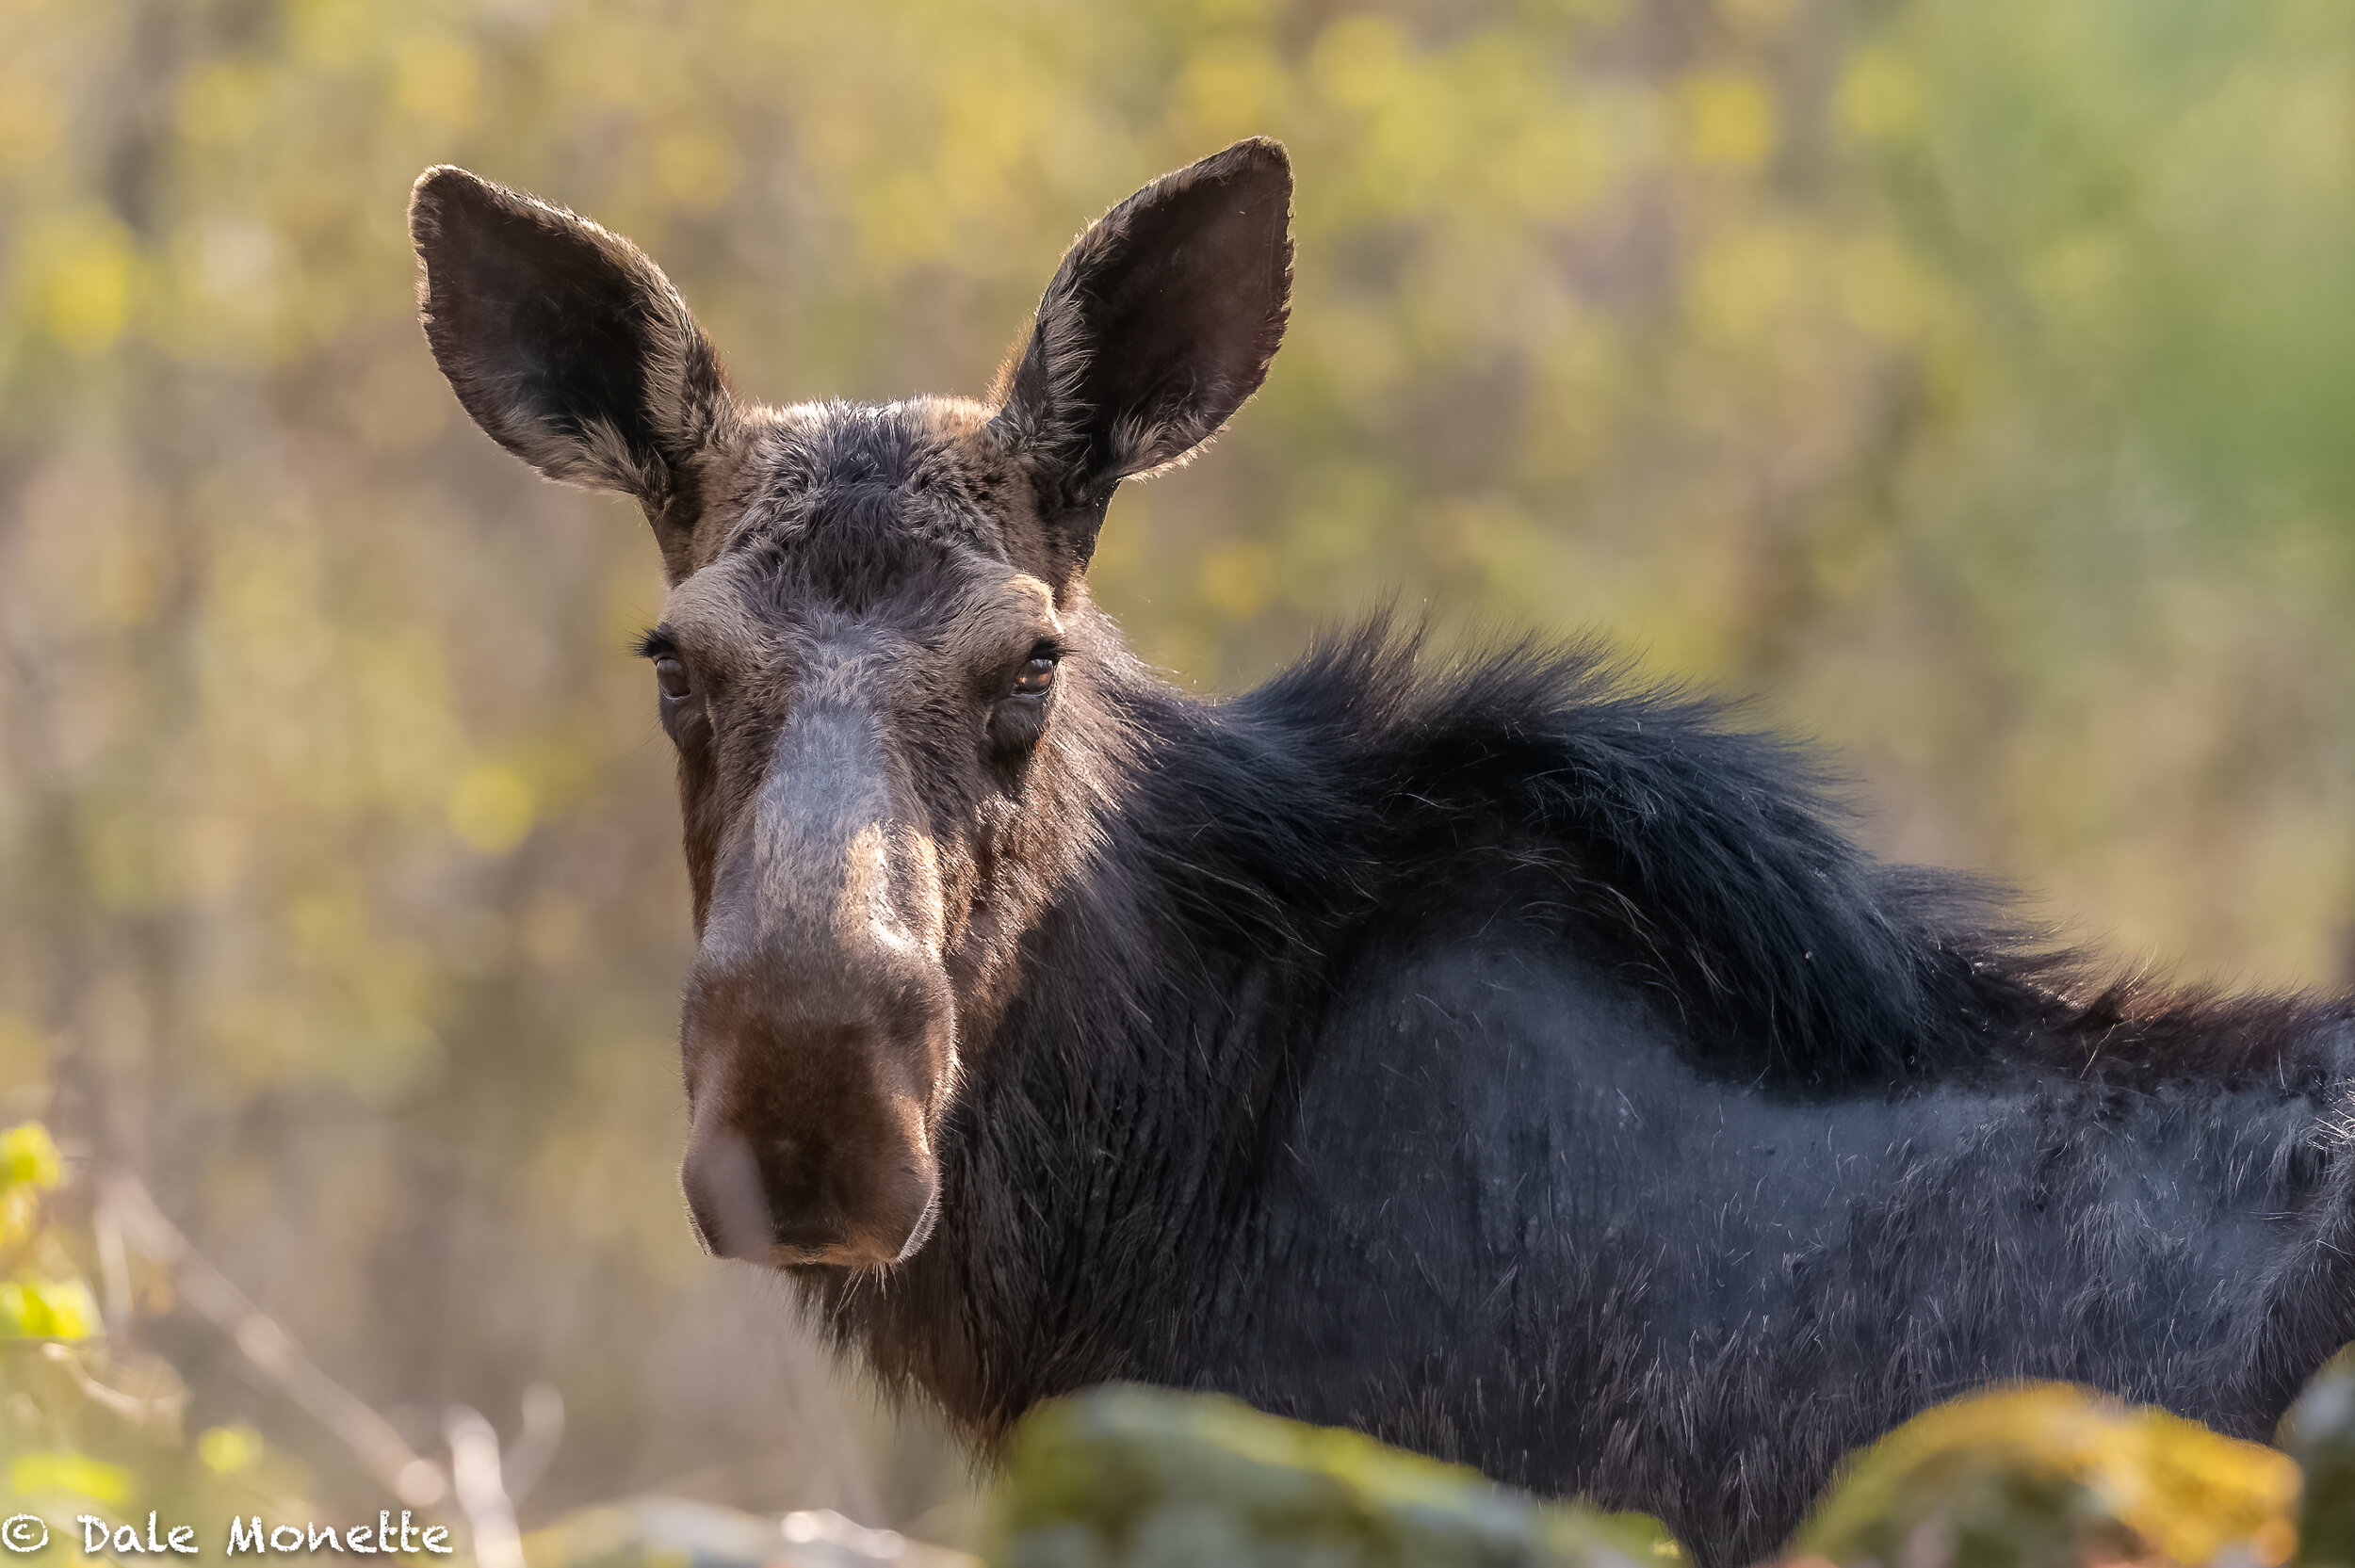   This female moose had no fear of me. There was a big stonewall between us and I was about 50 yards away.  Thanks to my 600mm F4 Nikon telephoto lens I could stay back without bothering her.  The way it should be.  